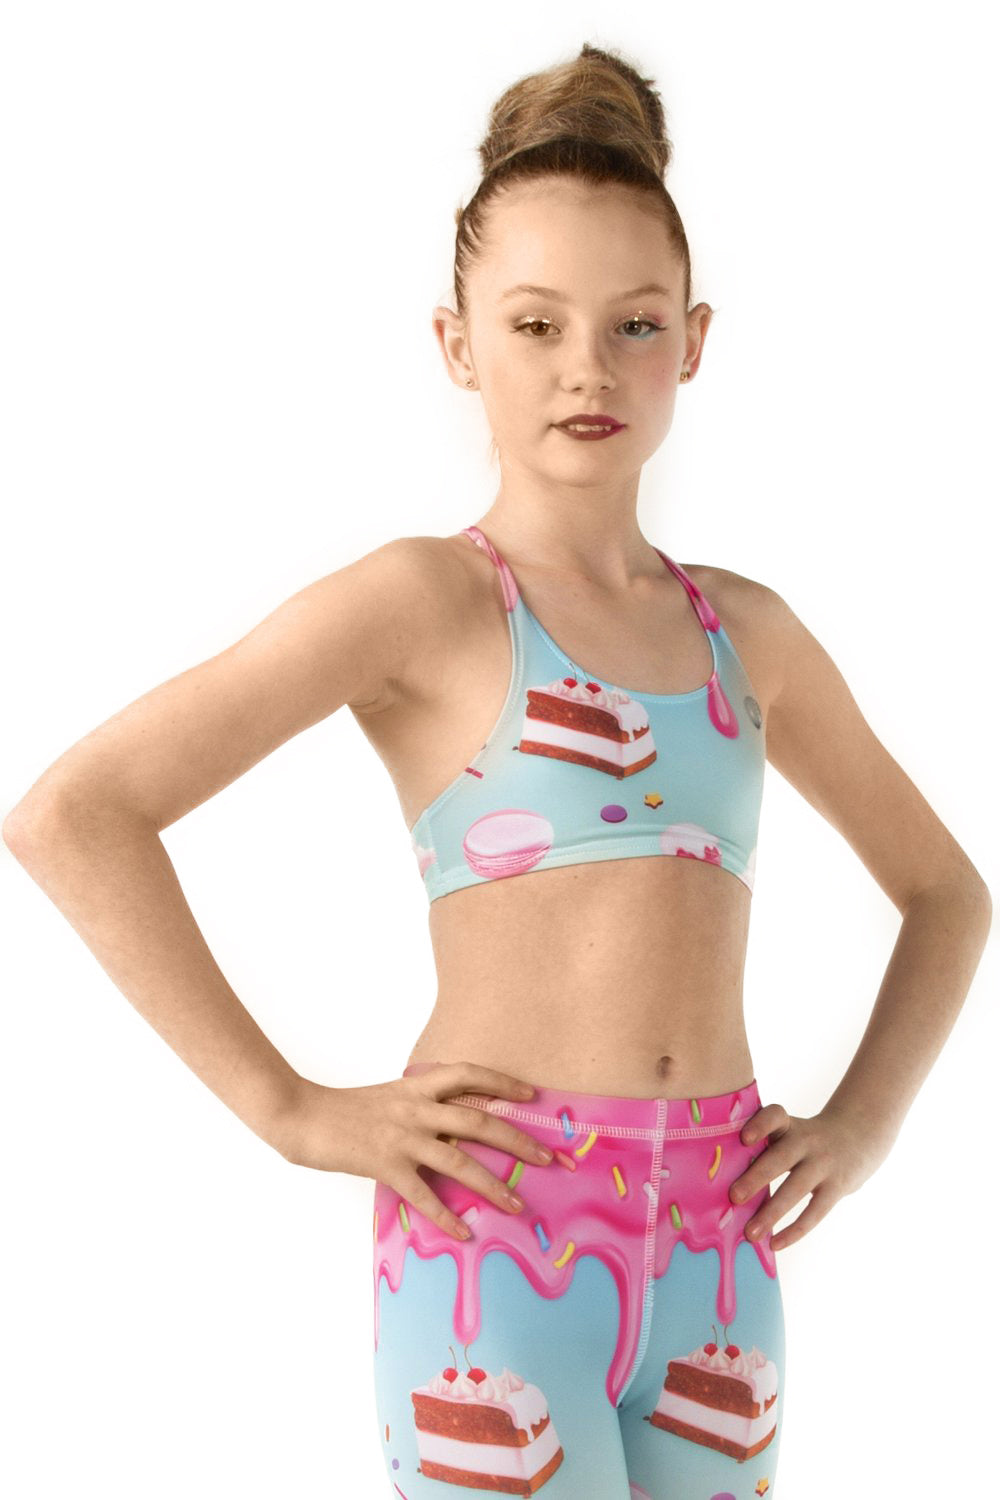 Candyland Bra Top - Youth